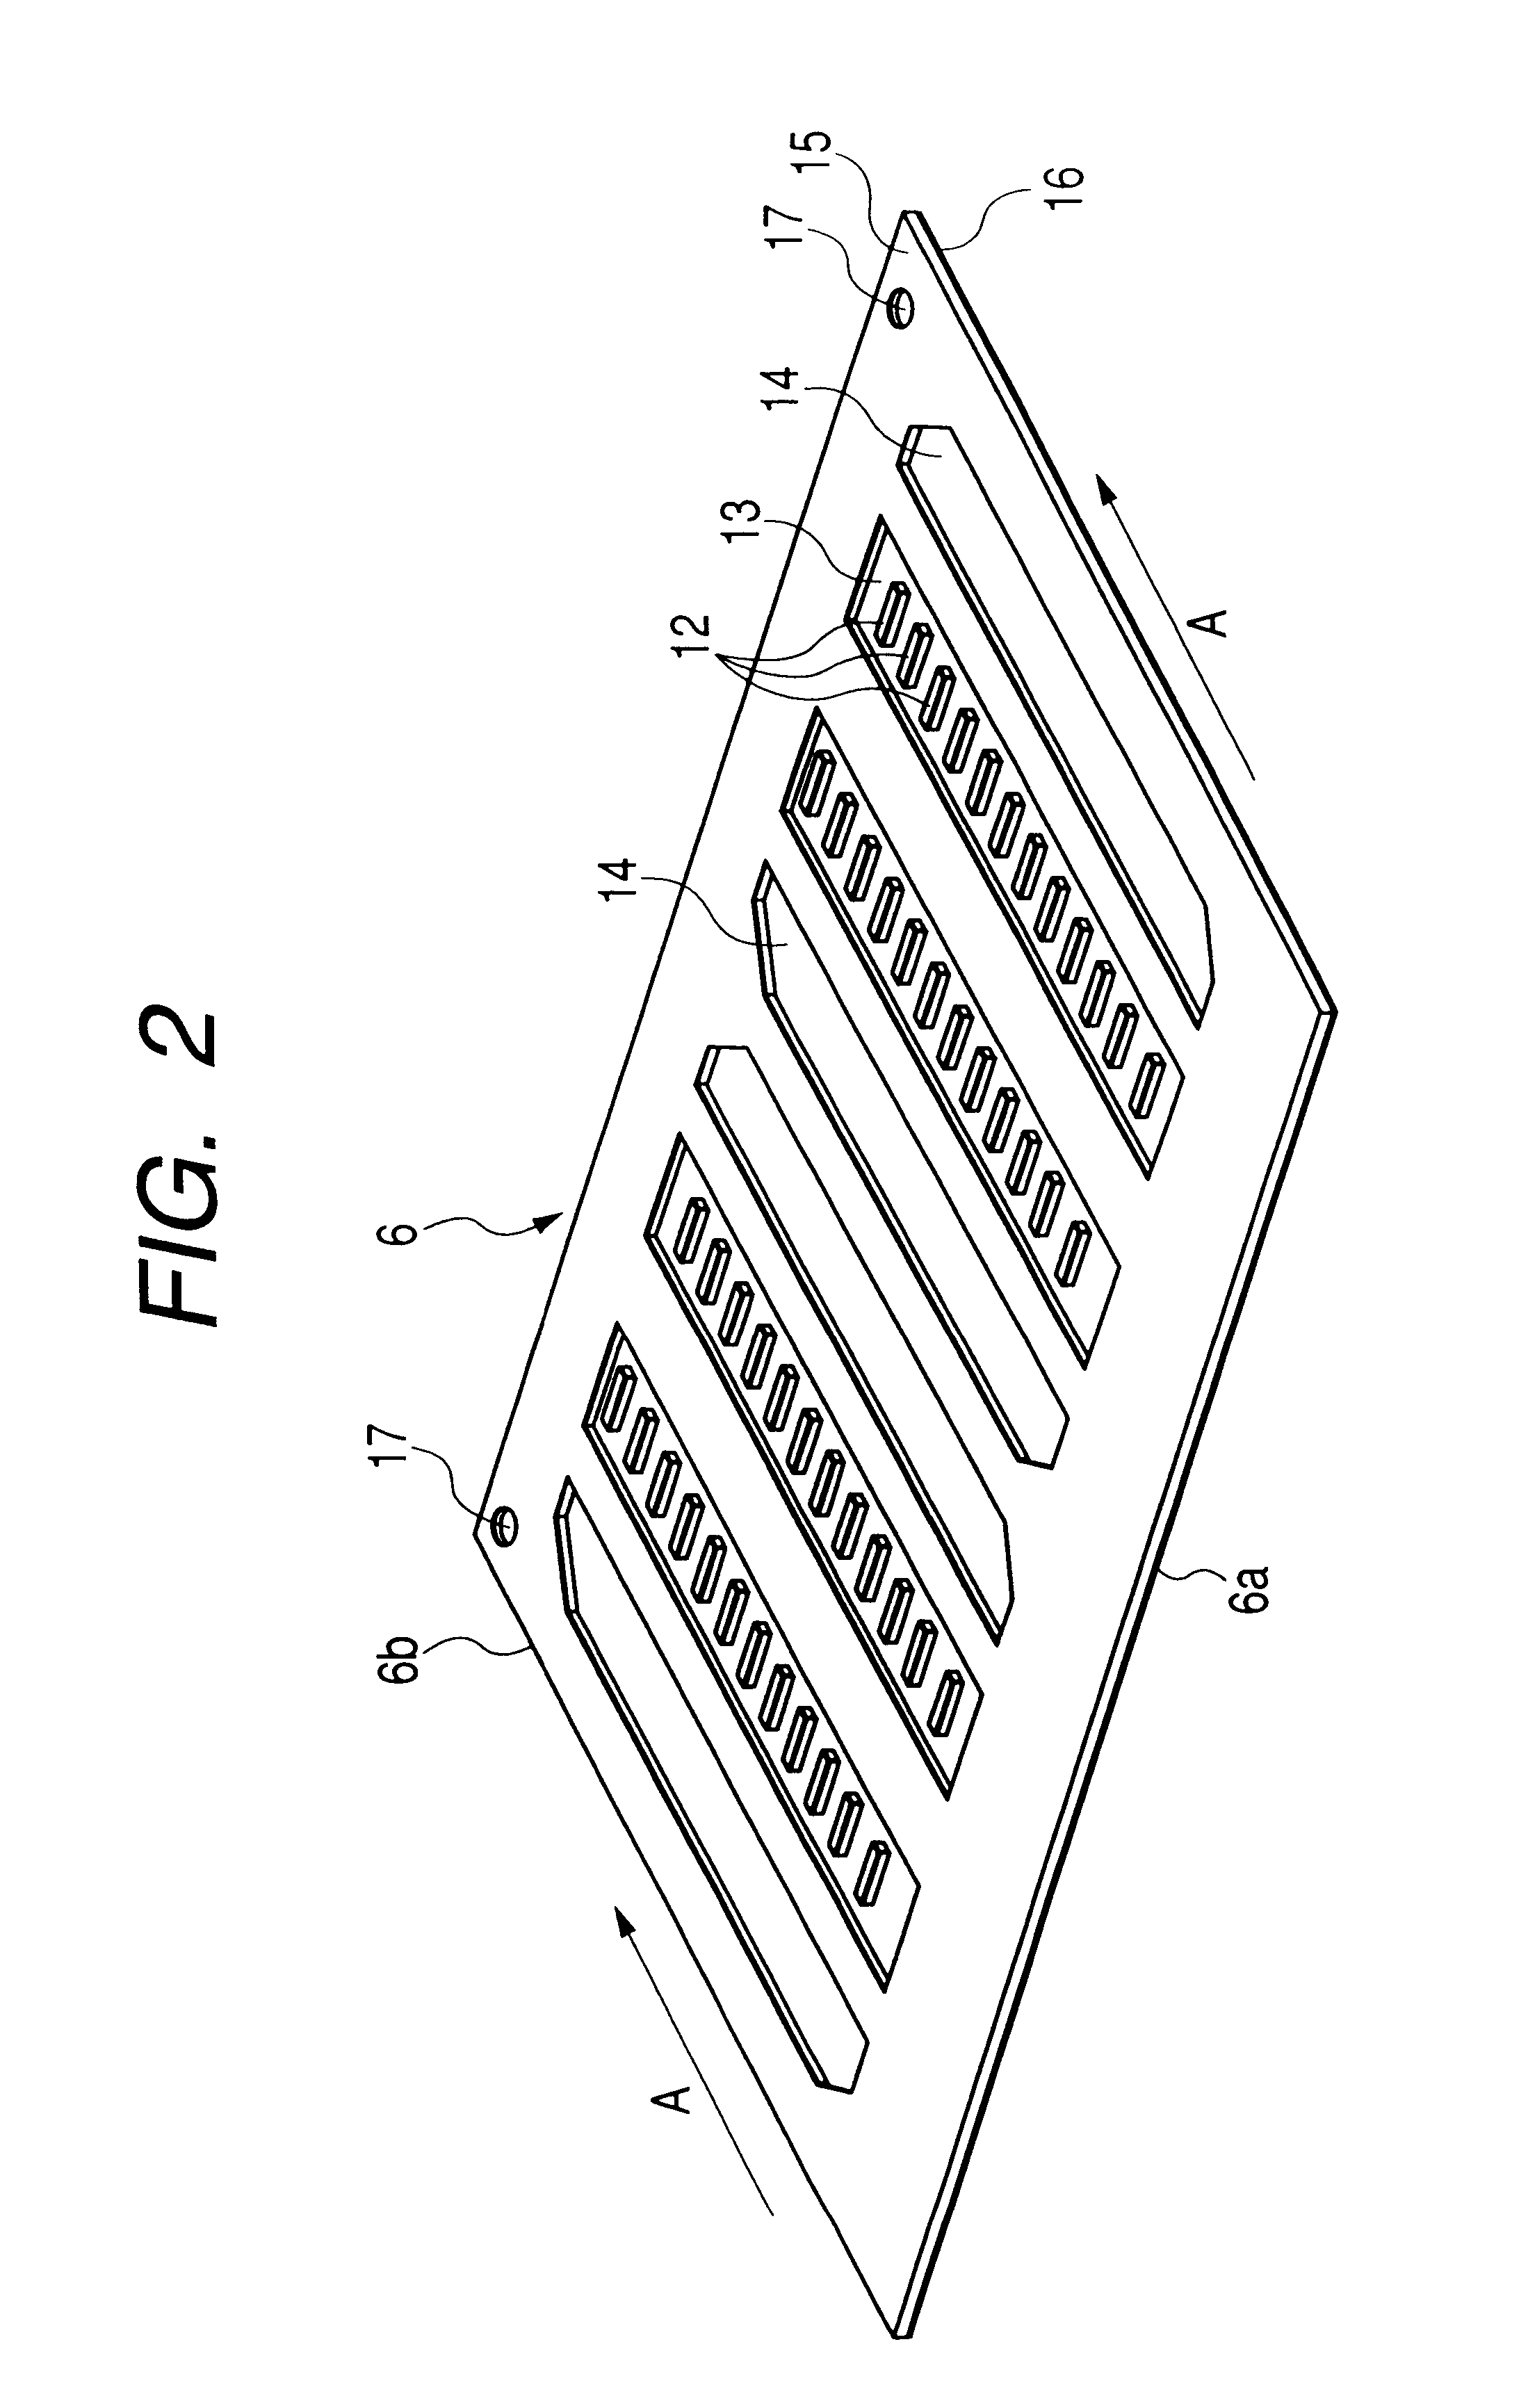 Ink jet recording head and method of producing a plate member for an ink jet recording head